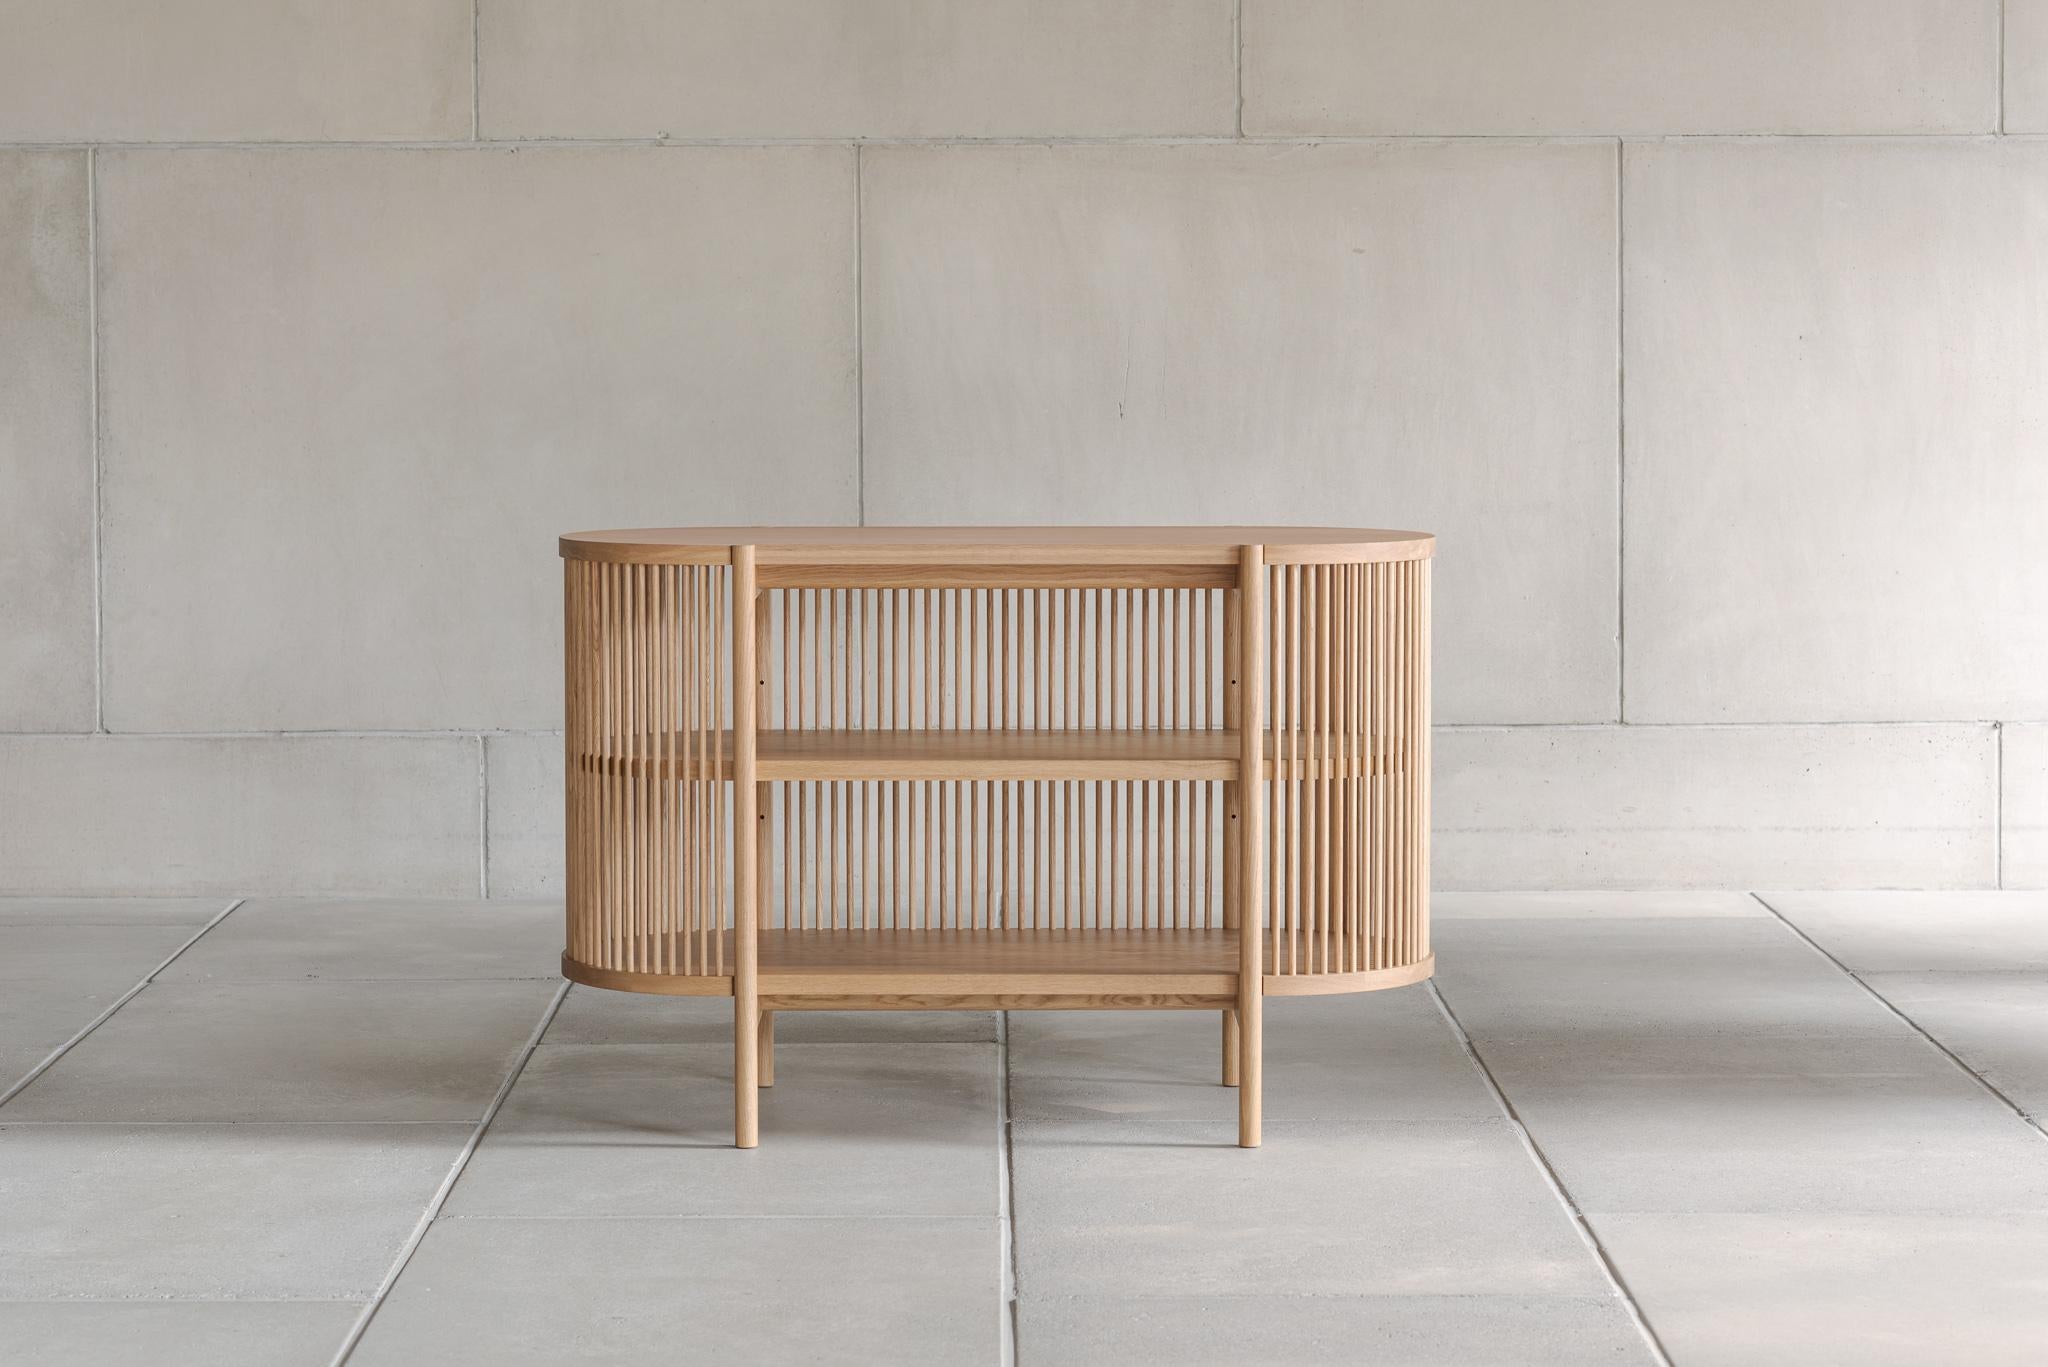 The Petit Bastone sideboard is a new addition to the Bastone case piece collection. It is designed by the master cabinet maker and designer Antrei Hartikainen for Poiat.

The Bastone Case Piece collection, which consists of a cabinet and a